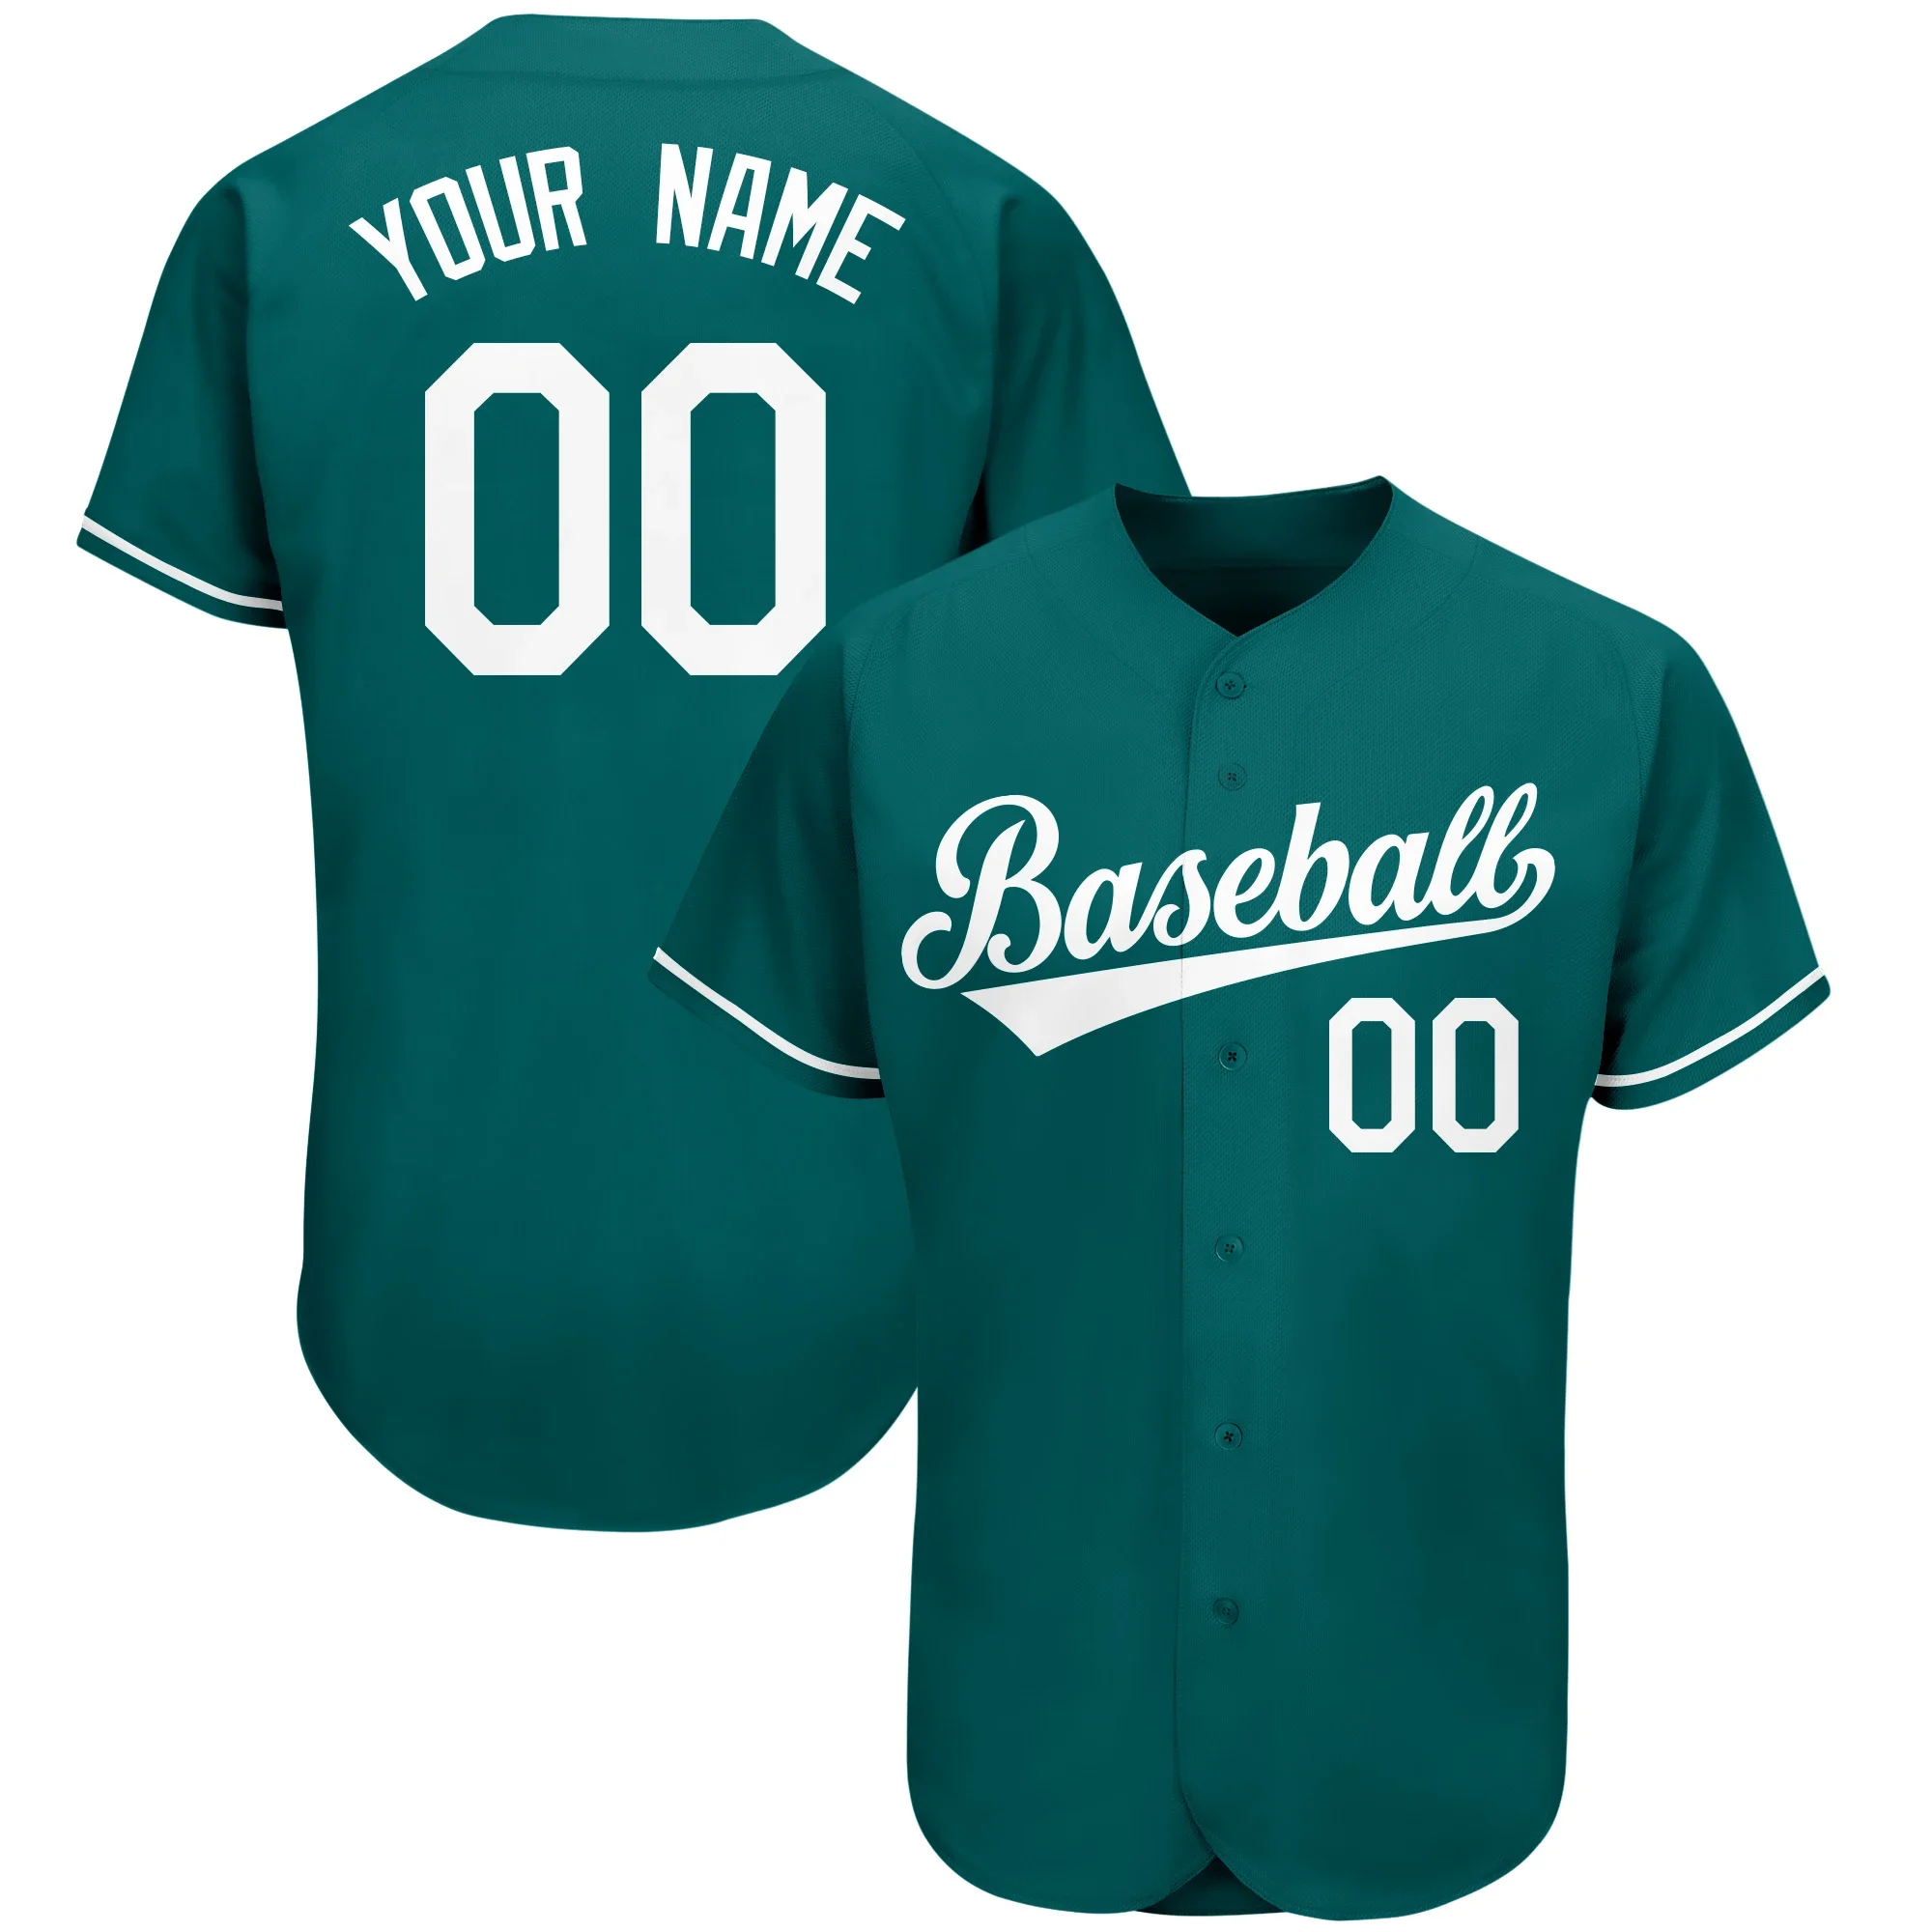 

Custom Baseball Jersey Personalized Printed Name and Numbers Design Your Own Novelty Button-down Tee Shirts for Adults/Kids